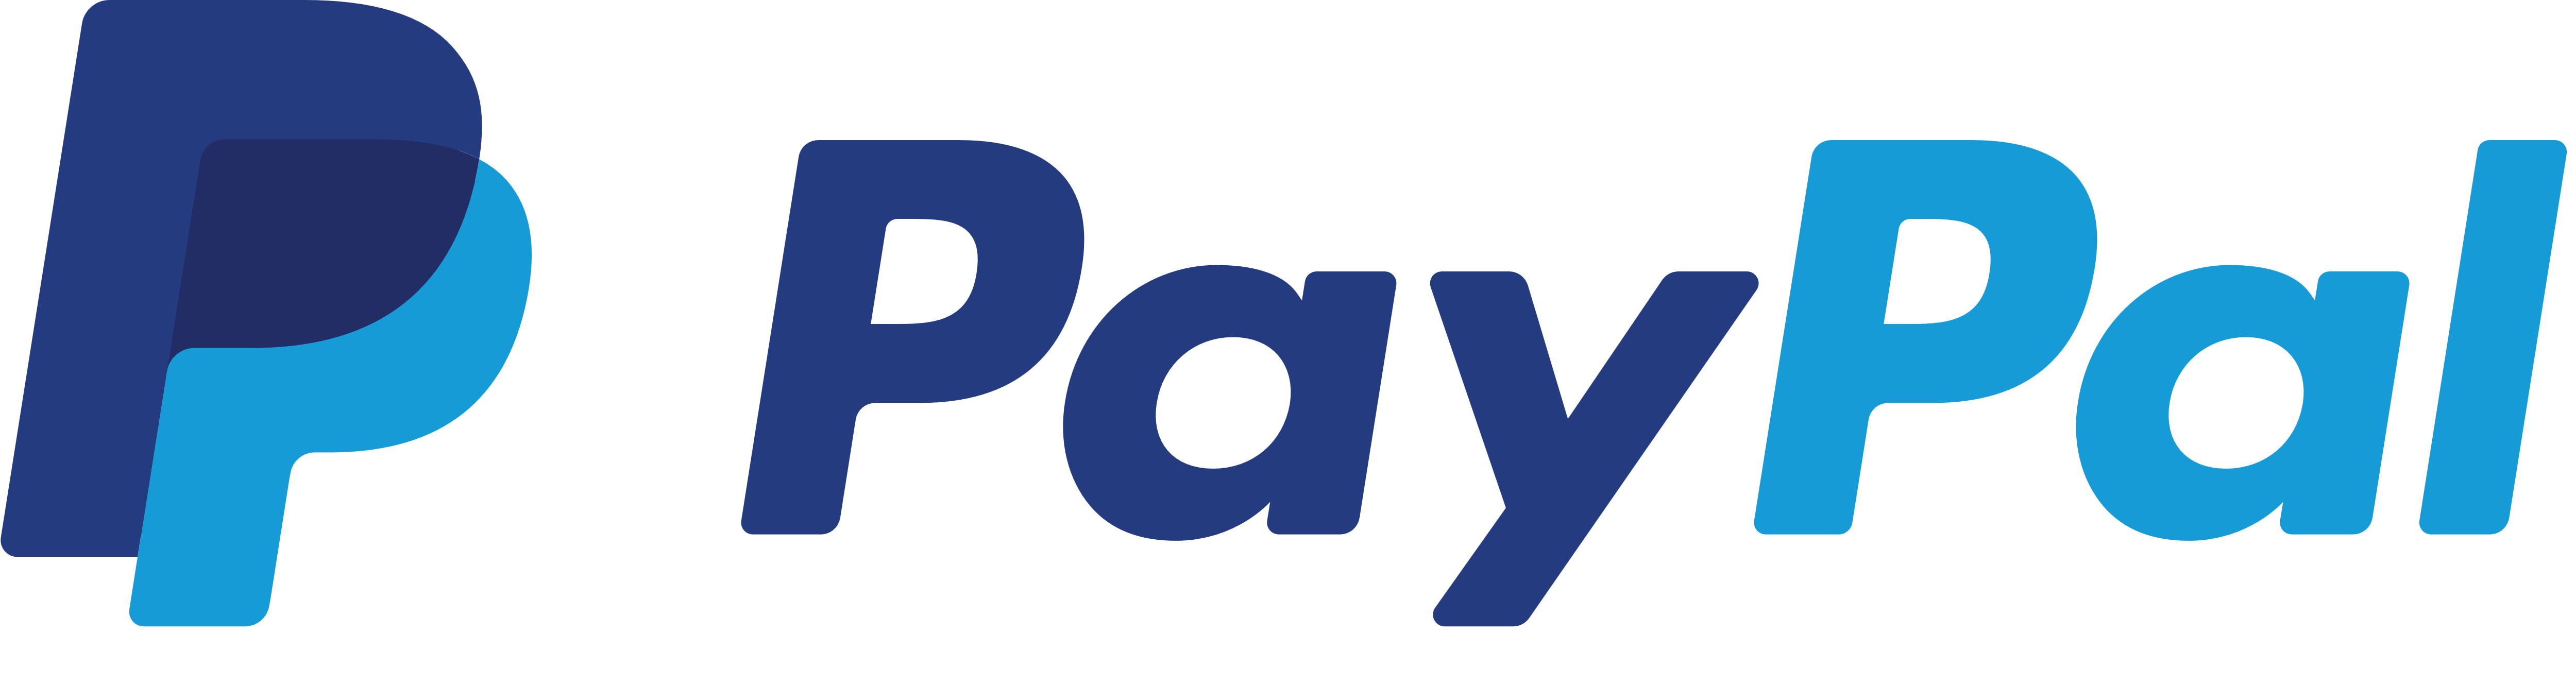 How To Buy Bitcoin and Other Cryptocurrencies Using Paypal